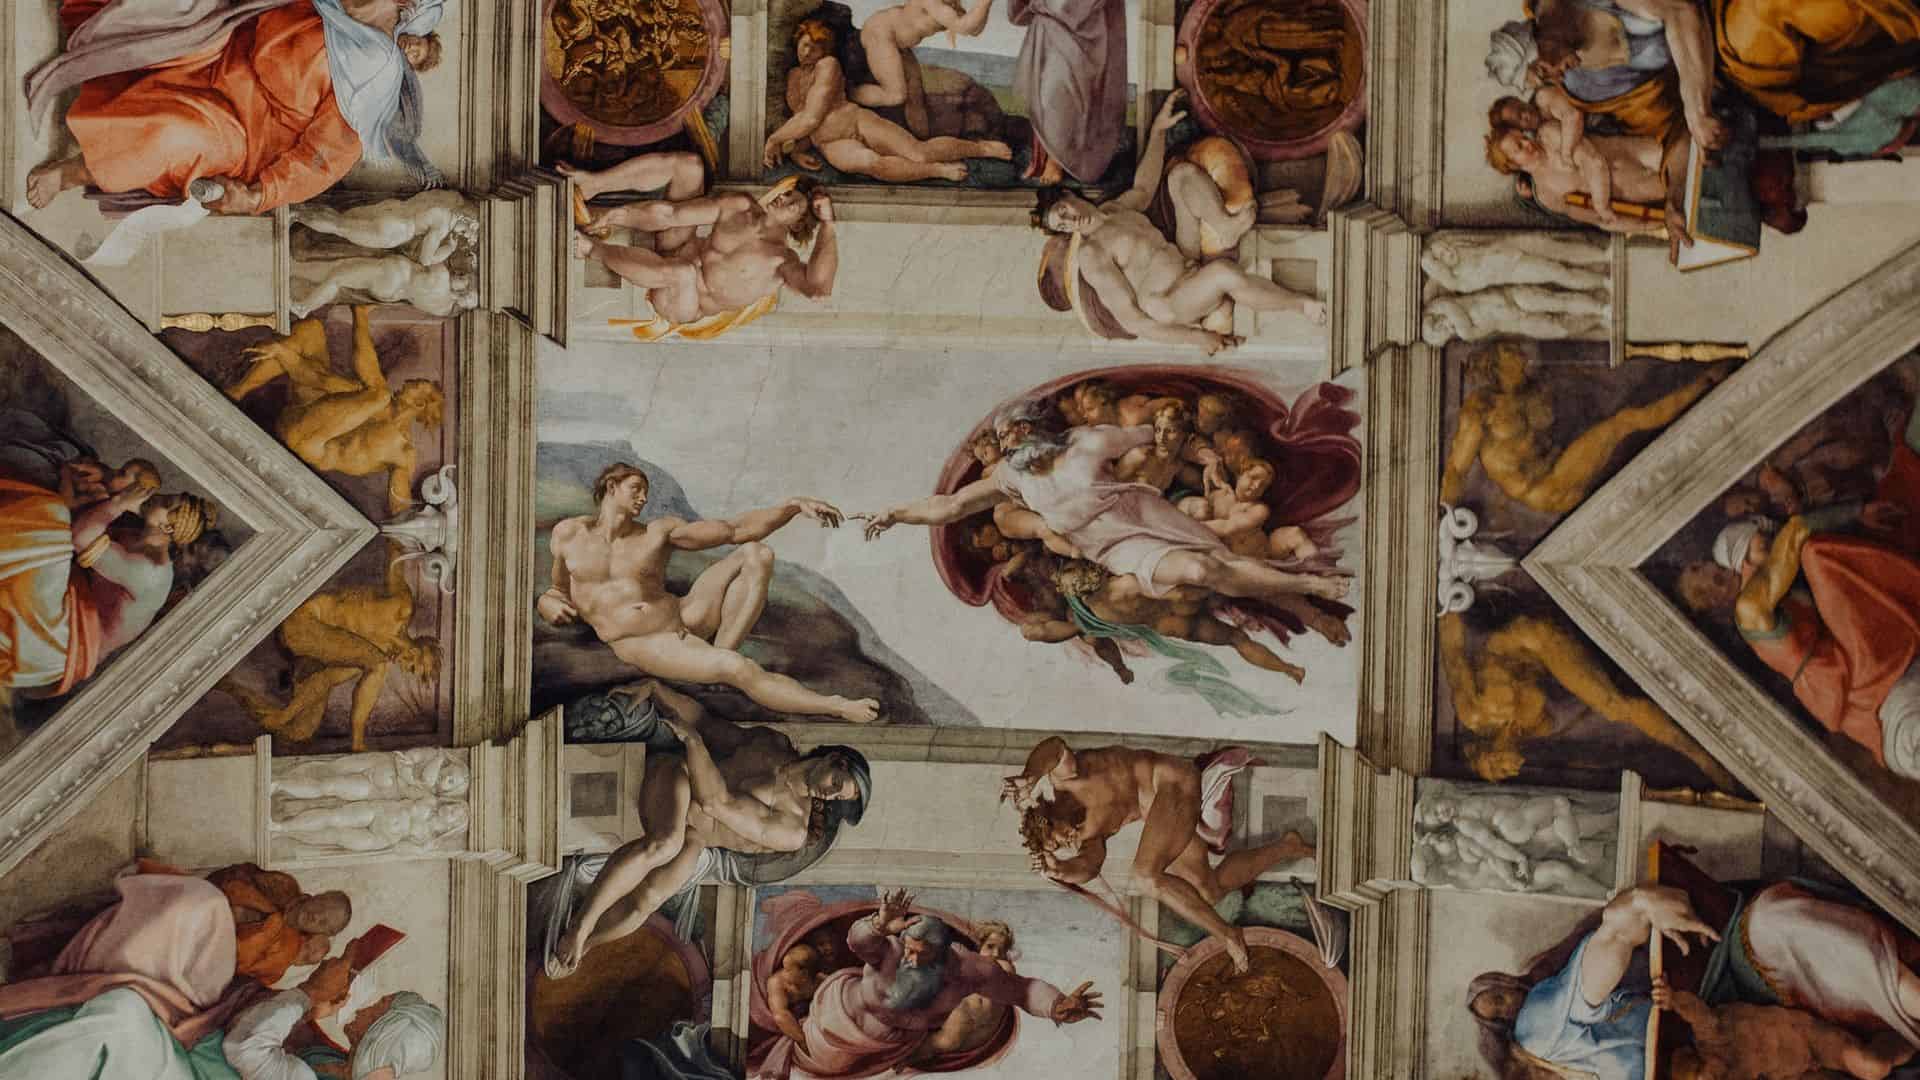 Ceiling of the Sistine Chapel in Rome